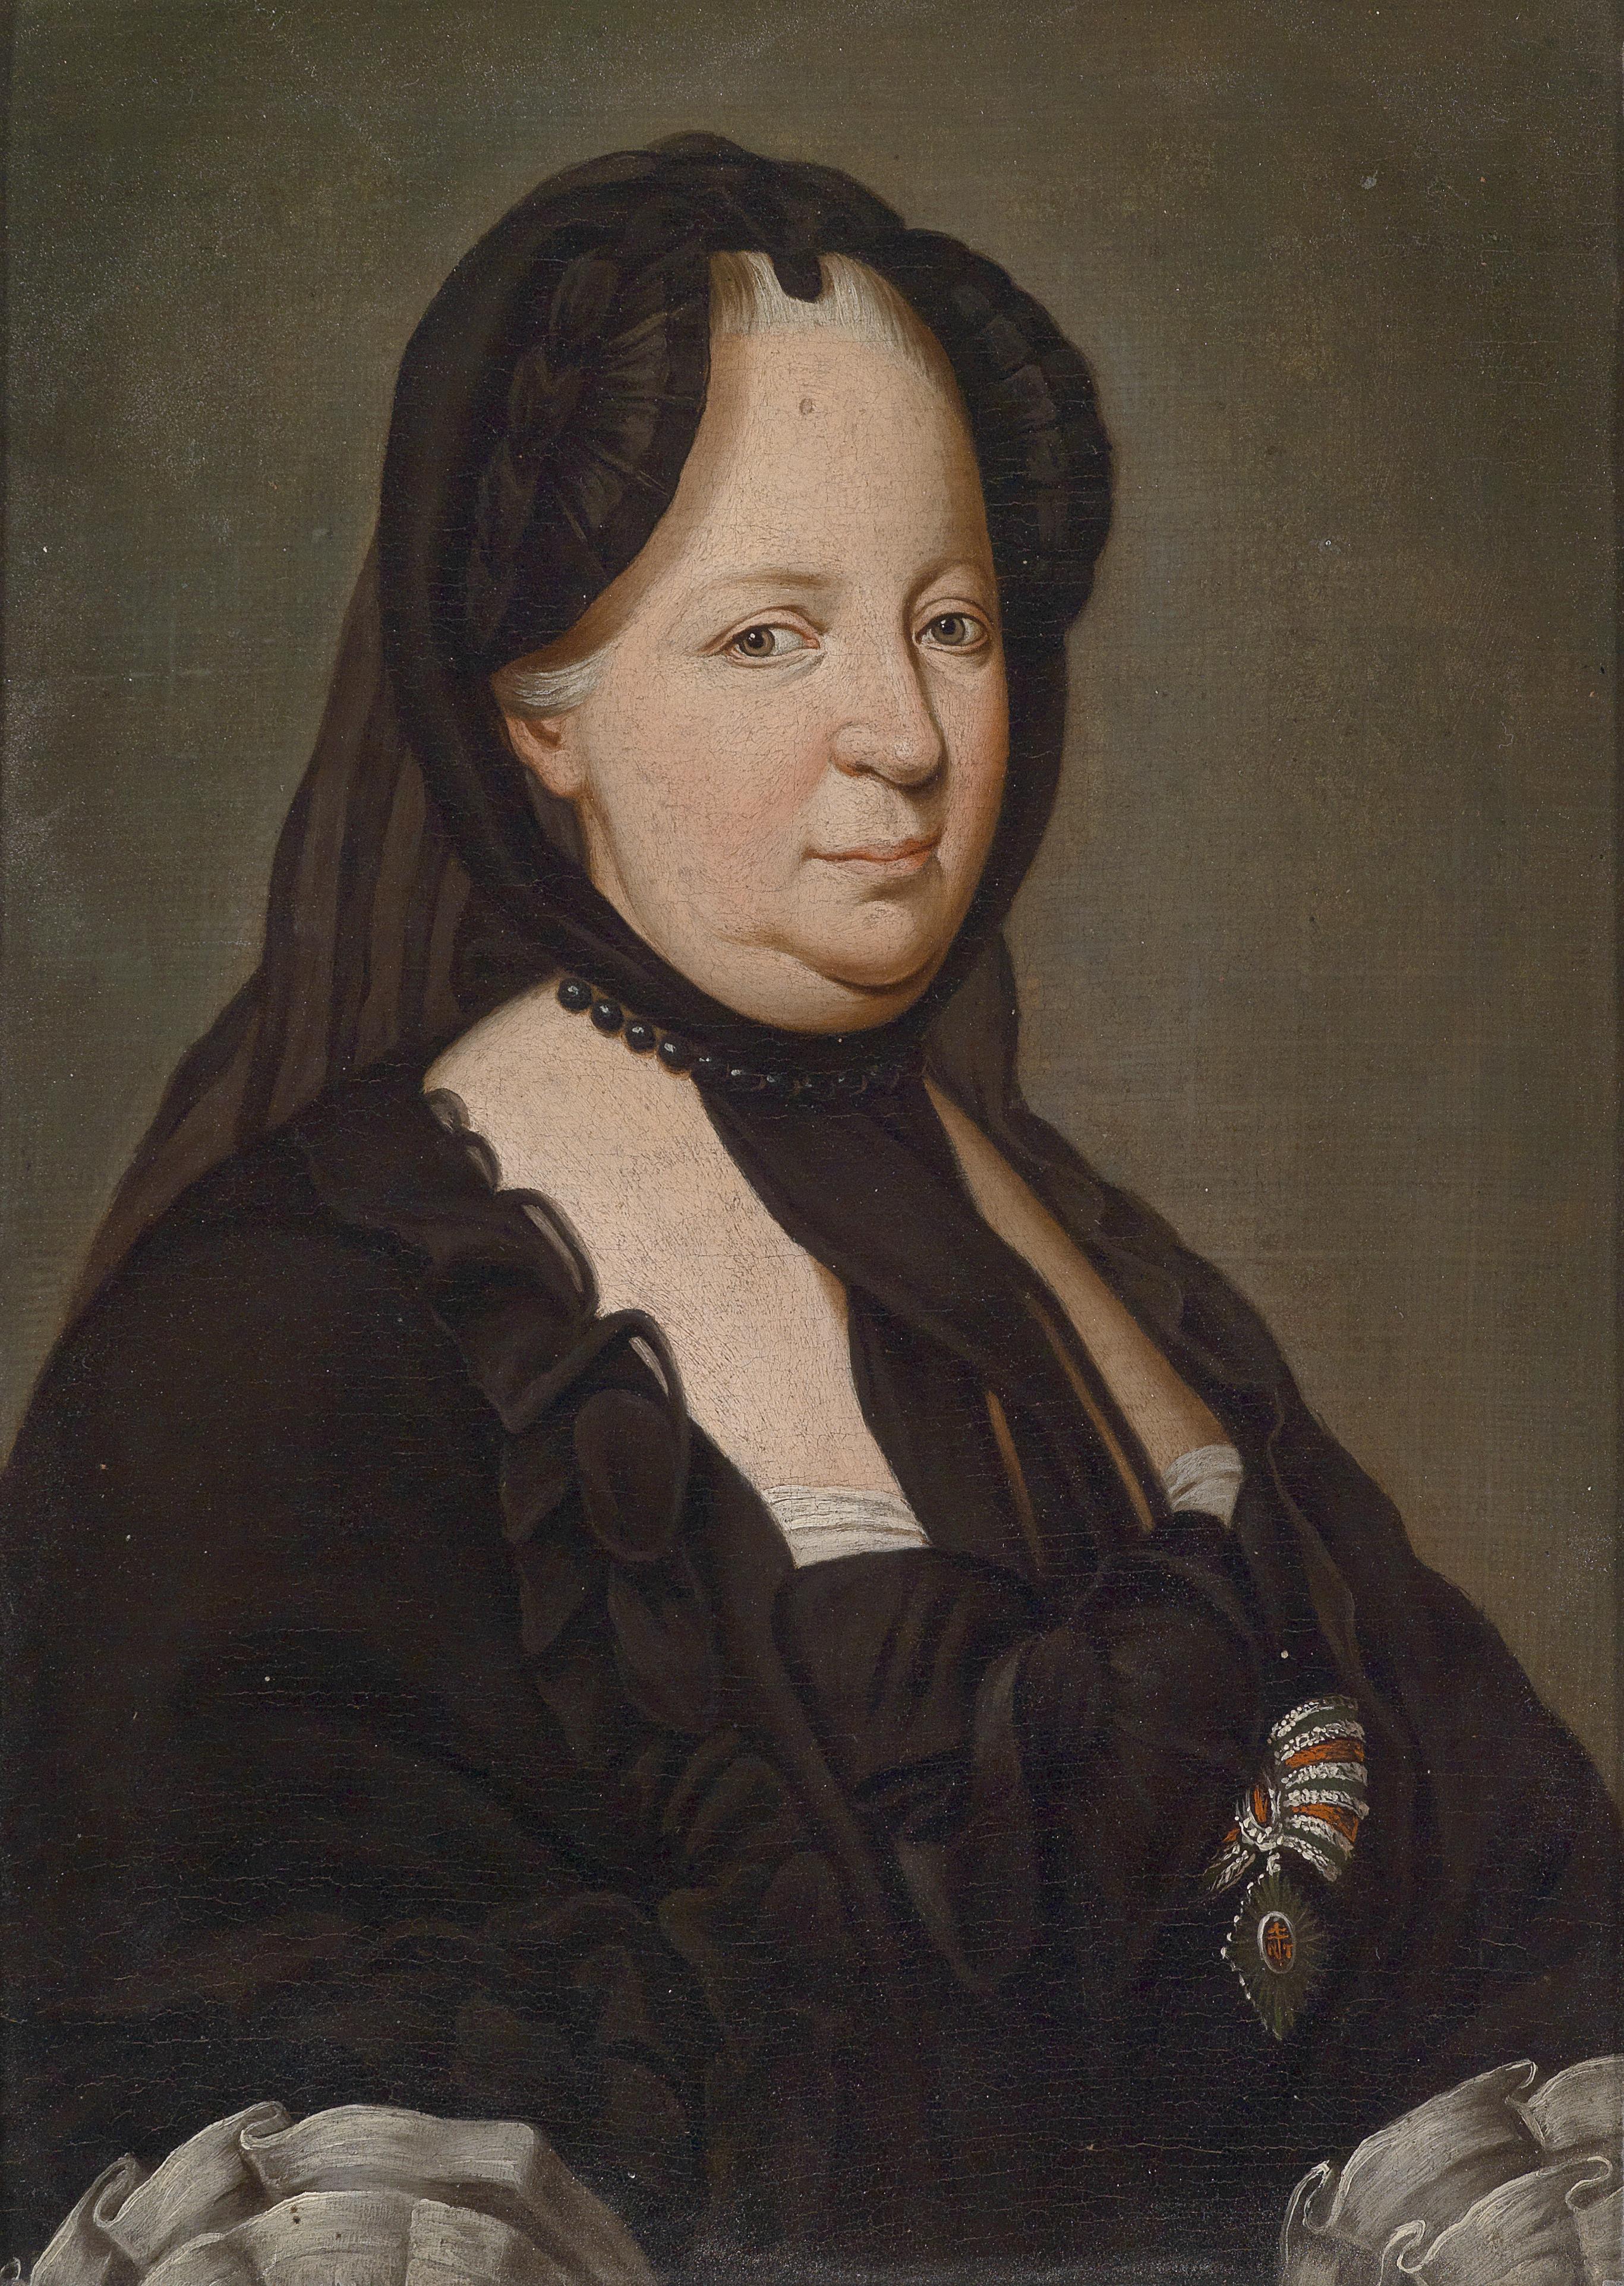 Kaiserin_Maria_Theresia_in_Witwentracht_c1770